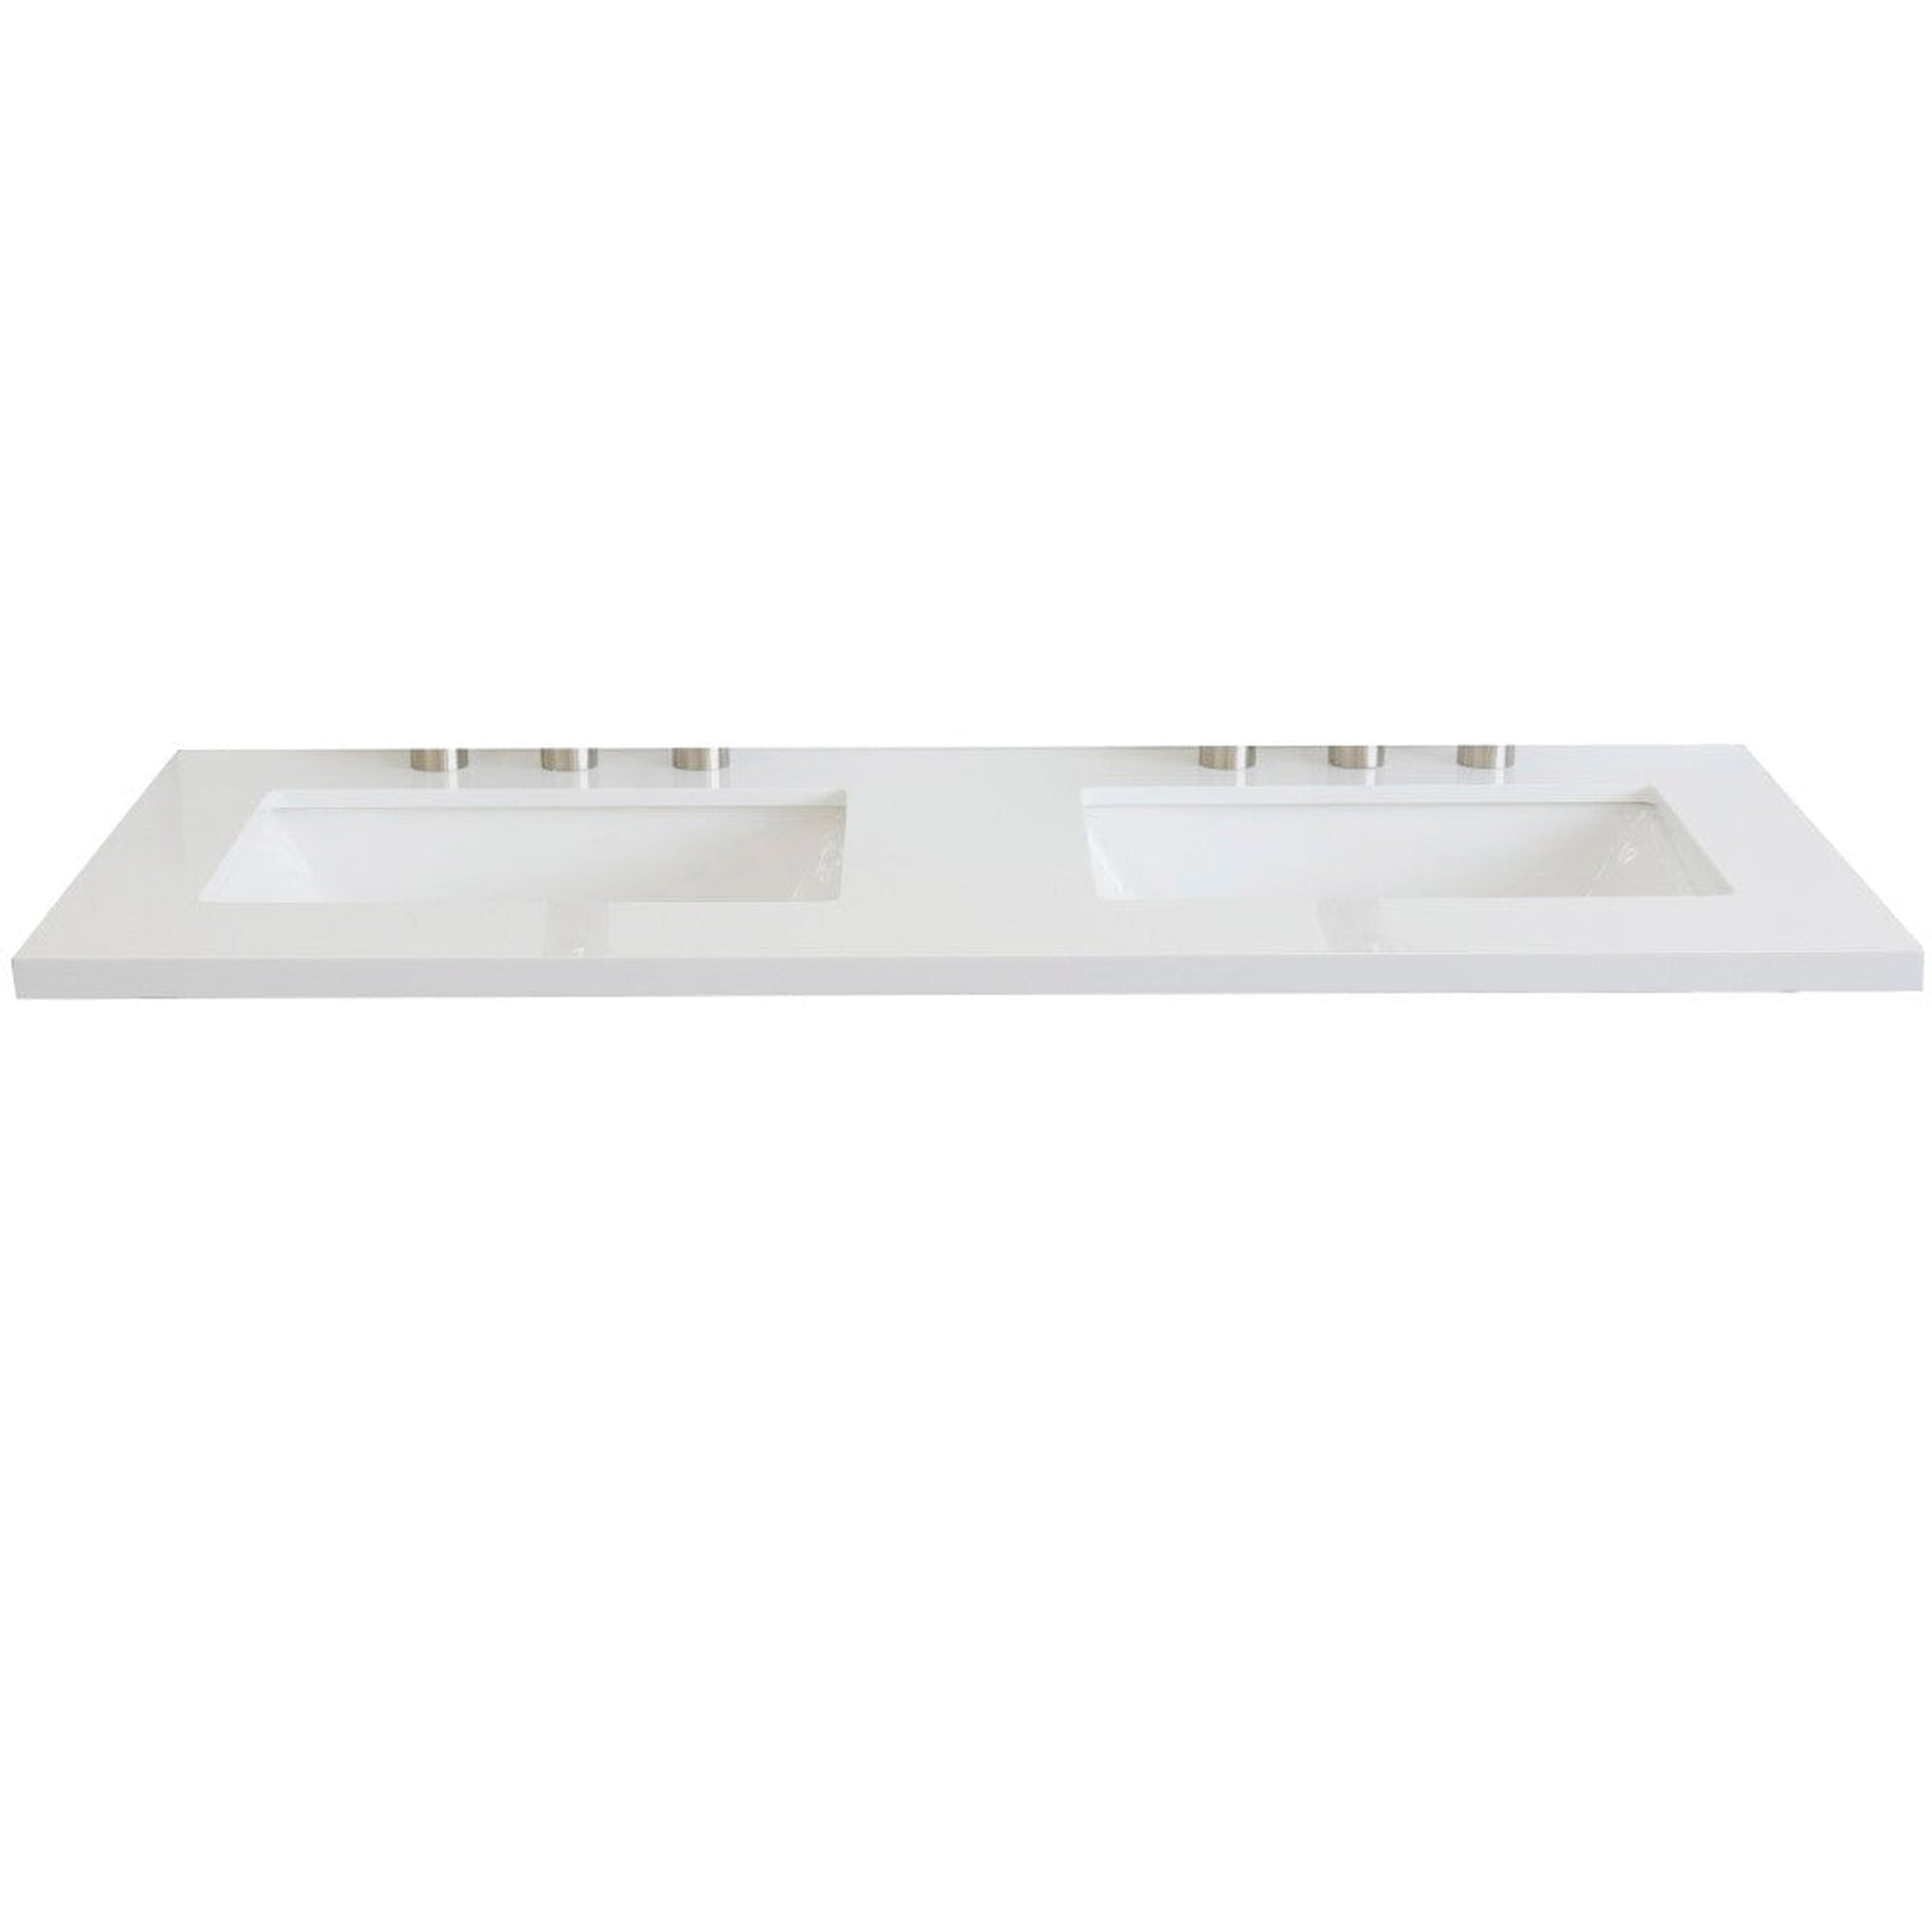 Bellaterra Home 49" x 22" White Quartz Three Hole Vanity Top With Double Undermount Rectangular Sink and Overflow